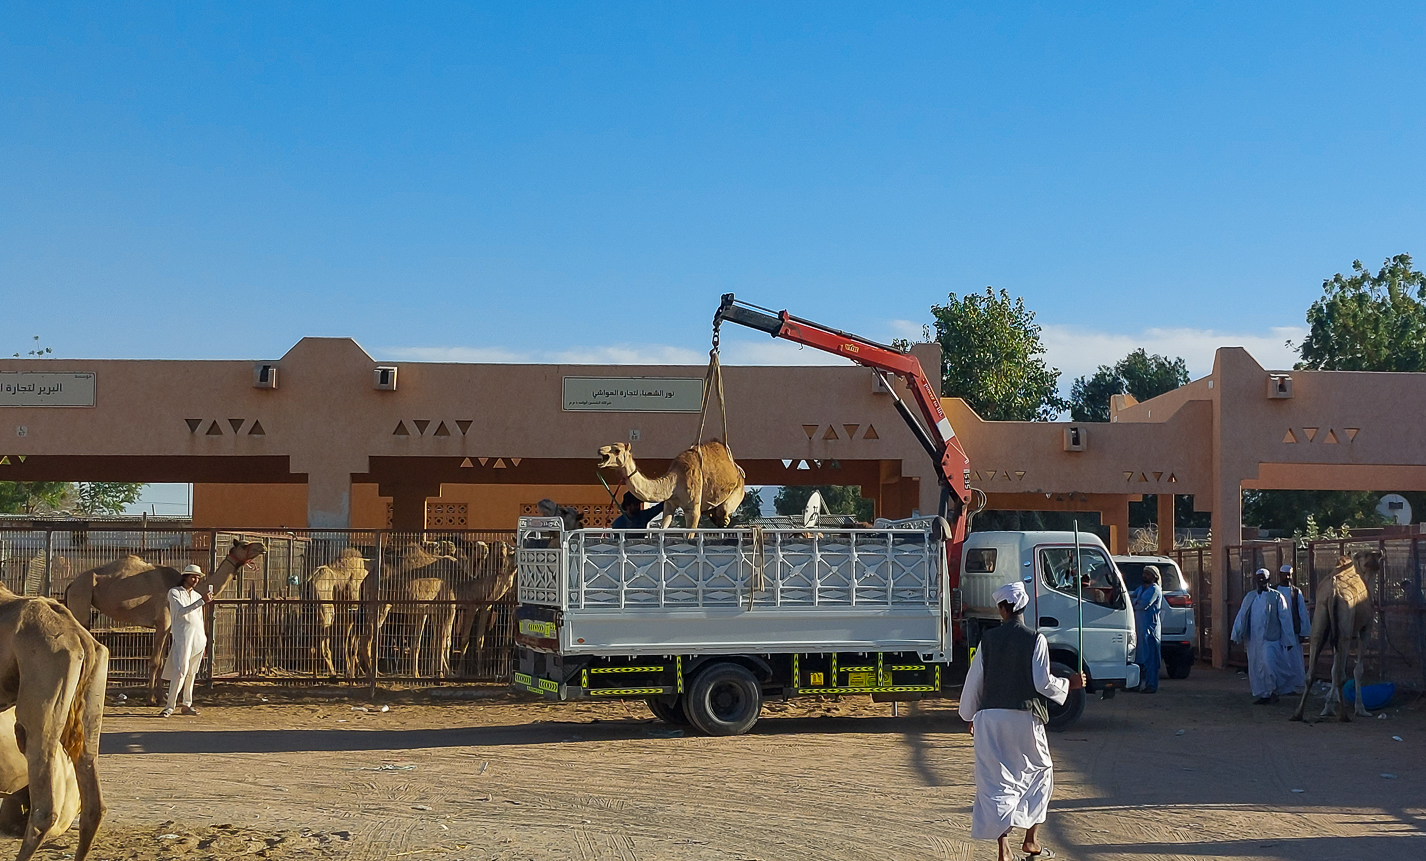 <span  class="uc_style_uc_tiles_grid_image_elementor_uc_items_attribute_title" style="color:#ffffff;">This camel hates it to be sold, ...put onto a truck...</span>